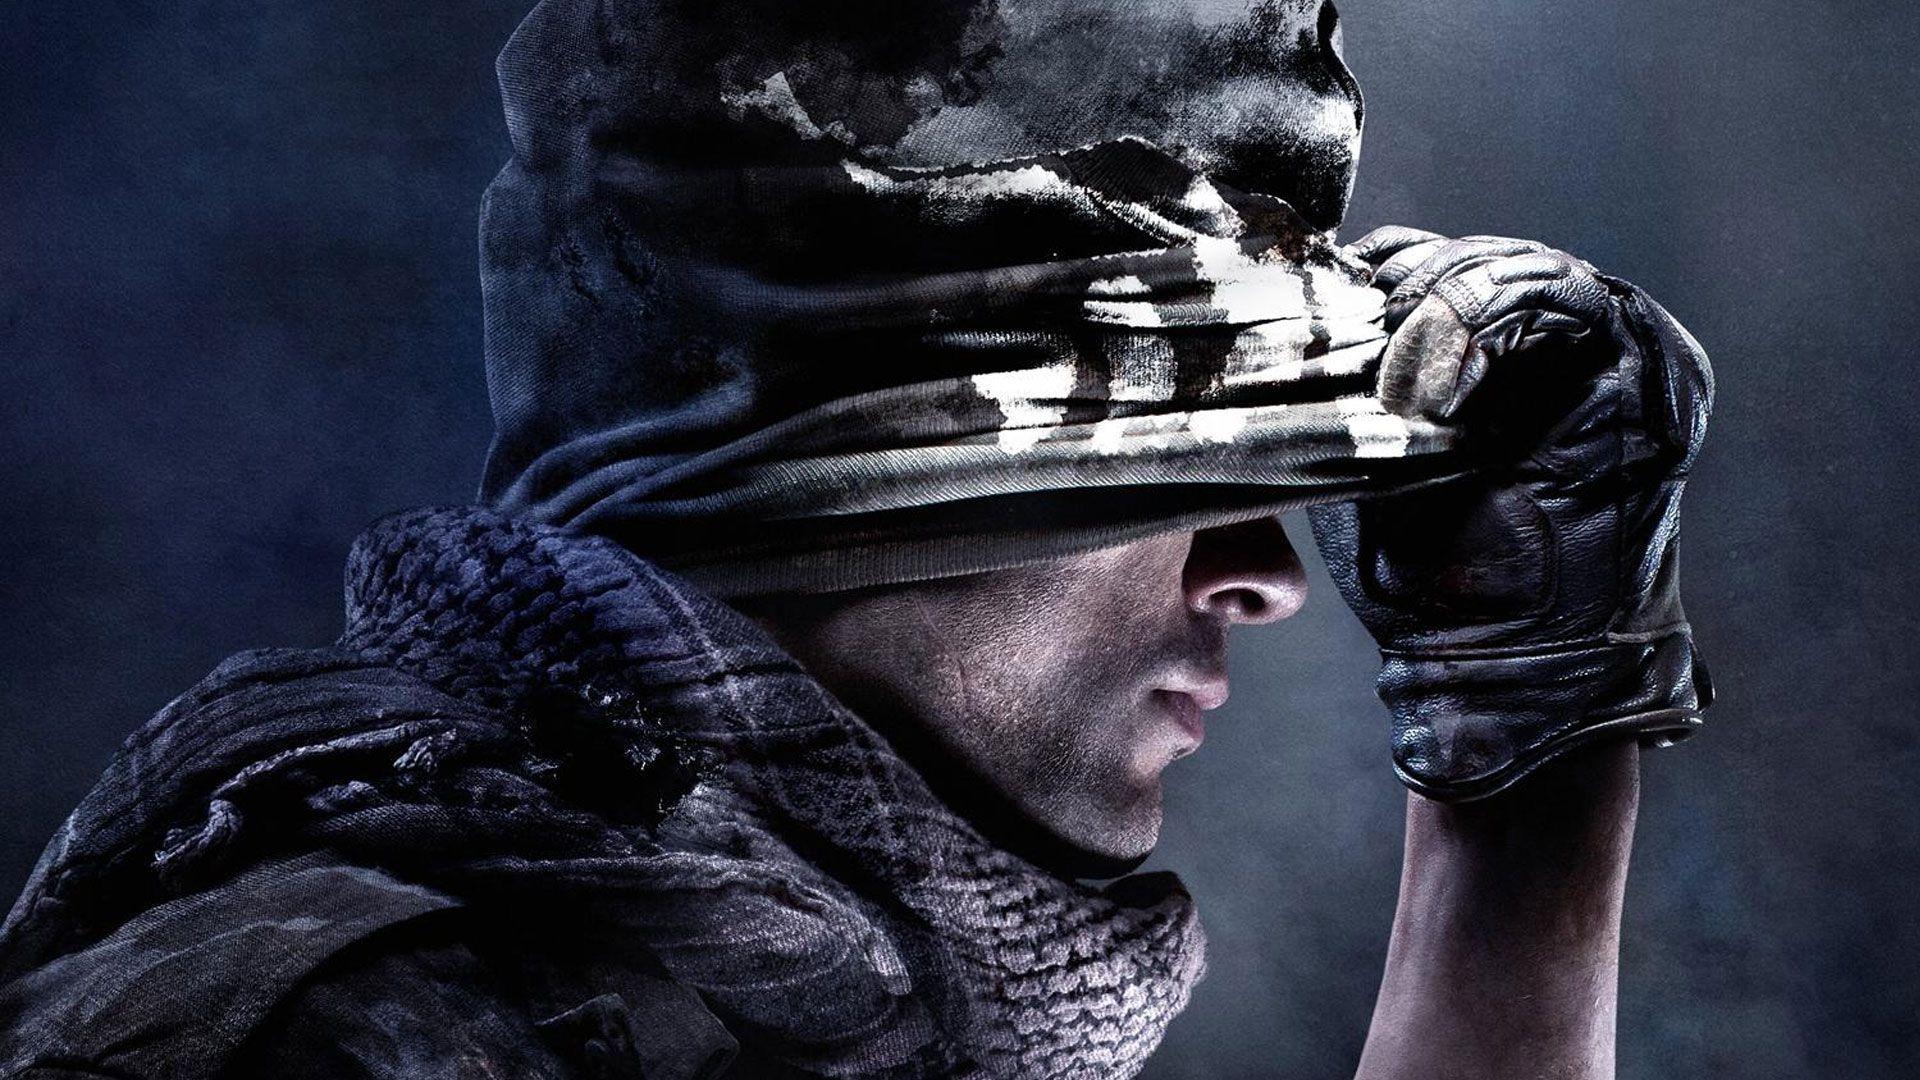 Call of Duty: Ghosts Wallpapers in HD